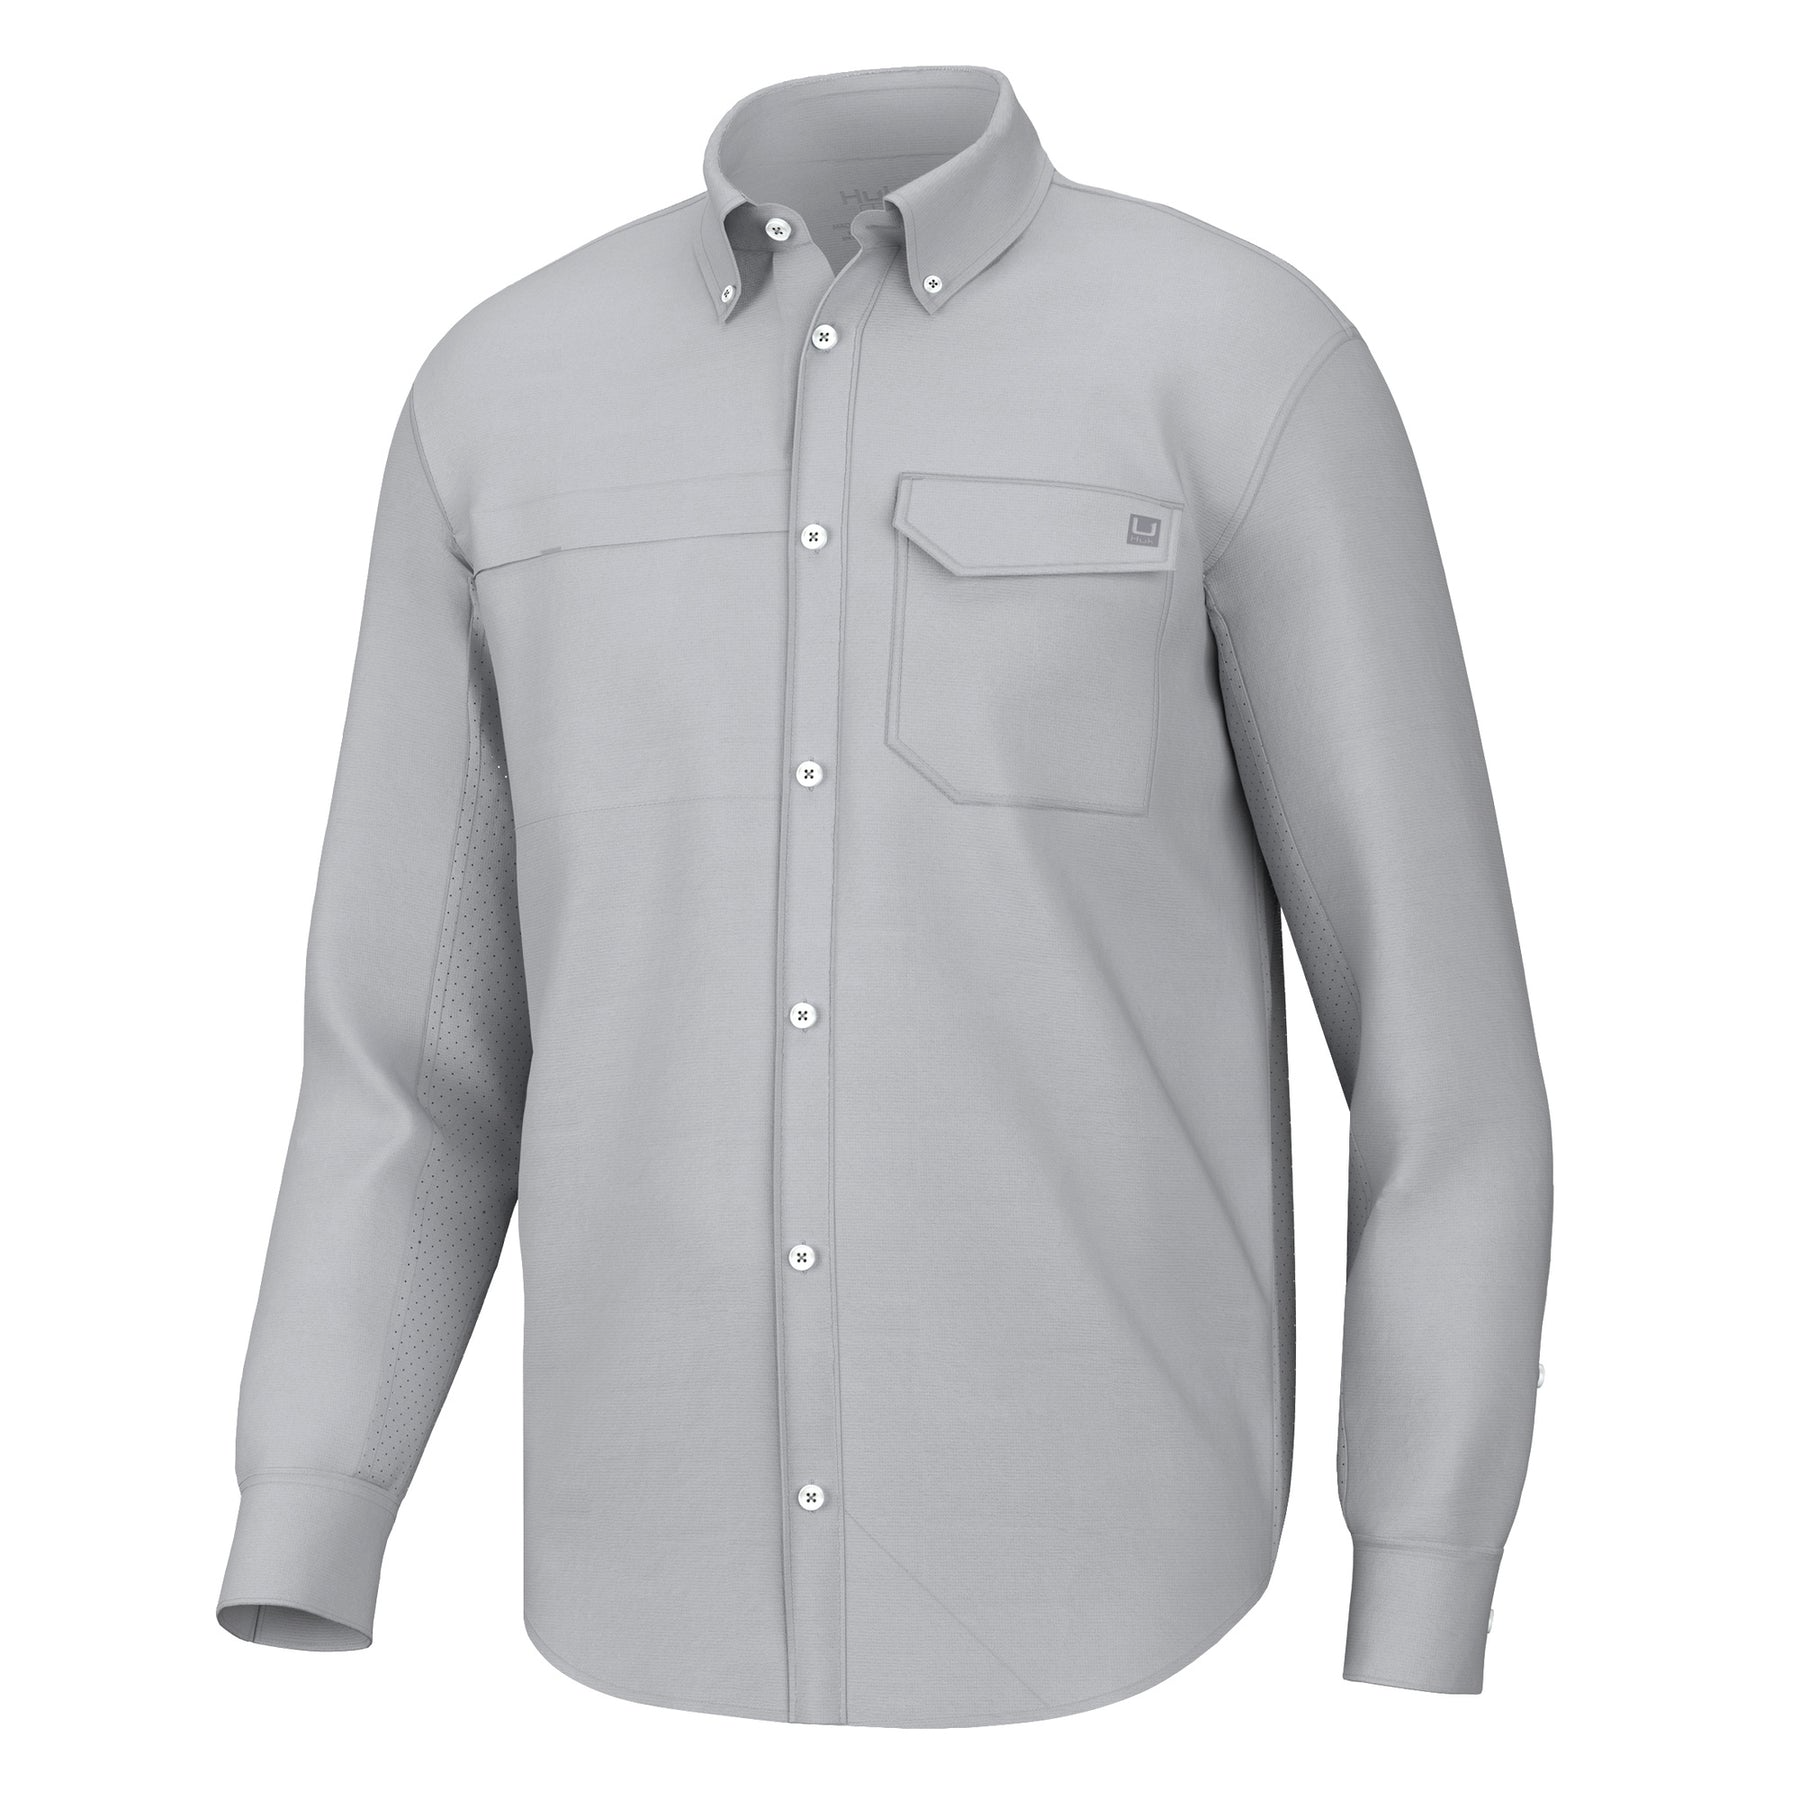 HUK TIDE POINT BUTTON-DOWN